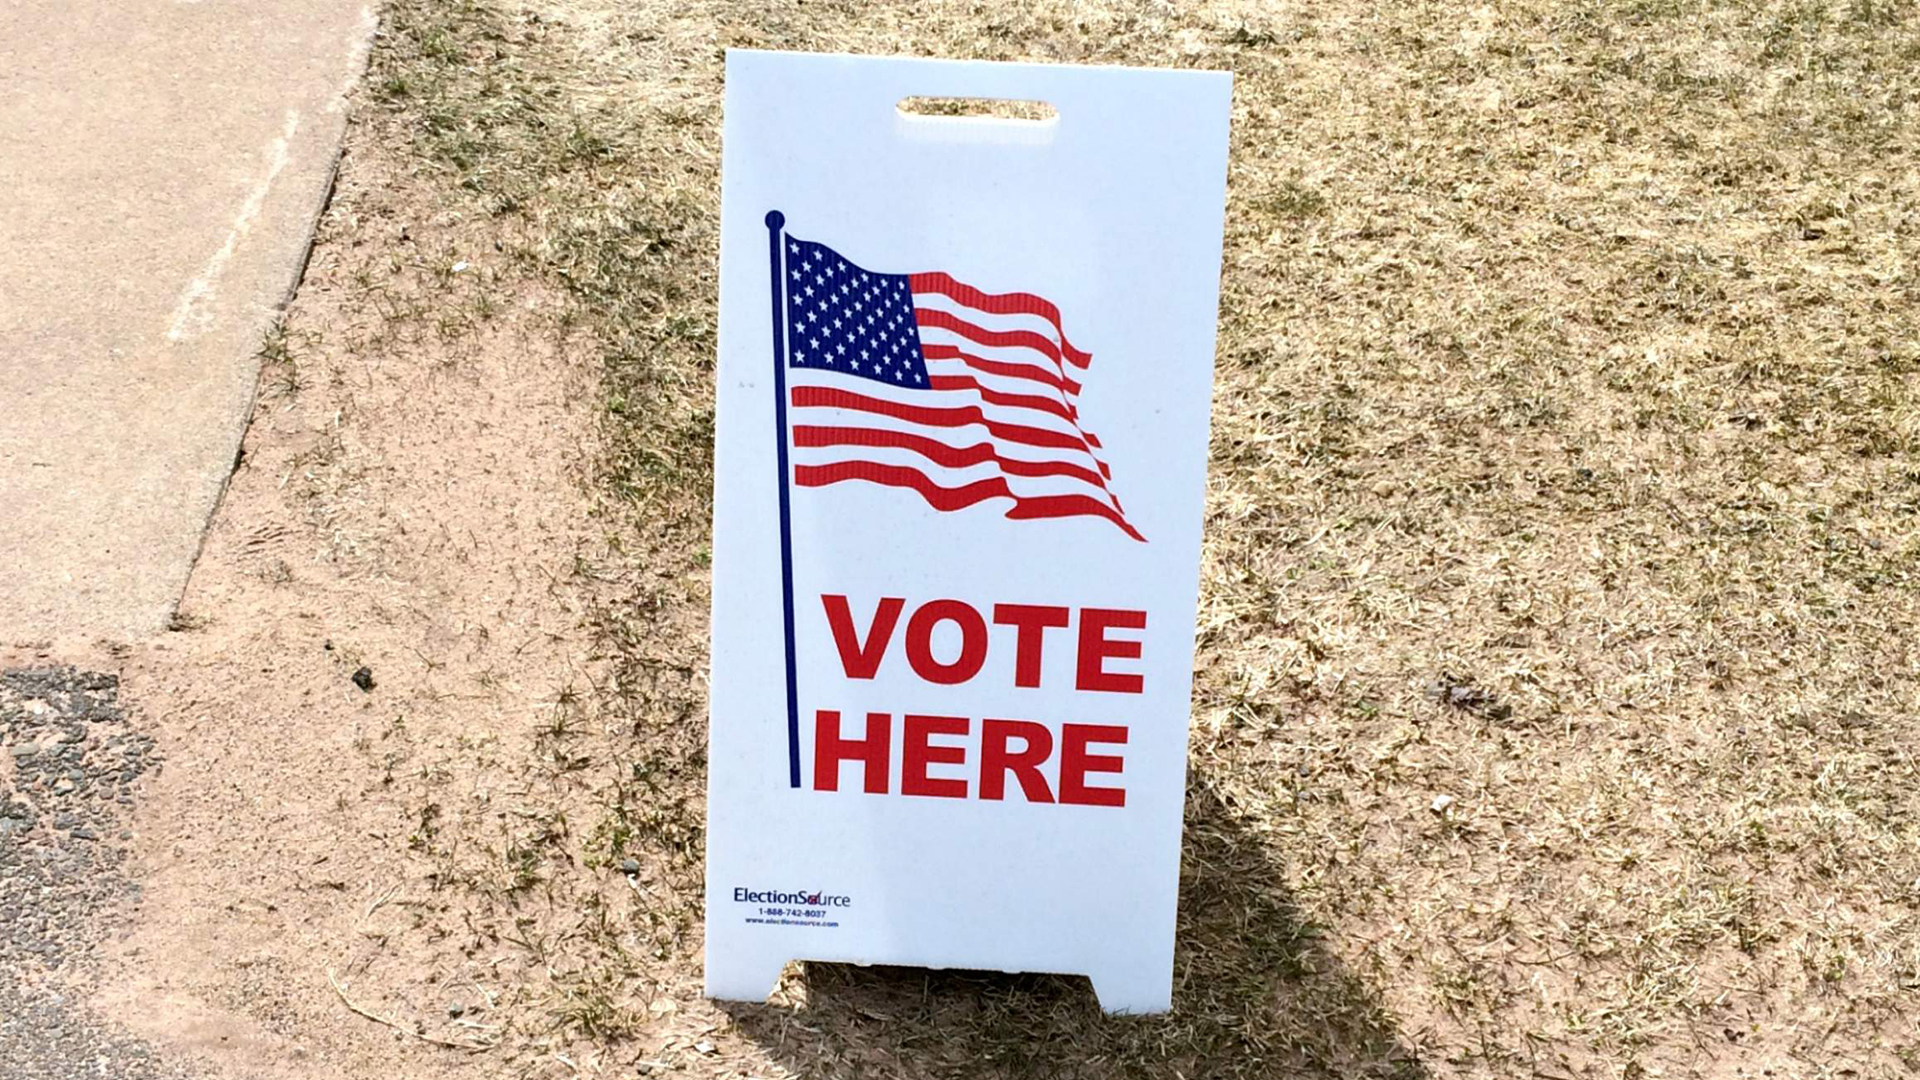 A sandwich board sign that says "Vote Here" with an American flag above it